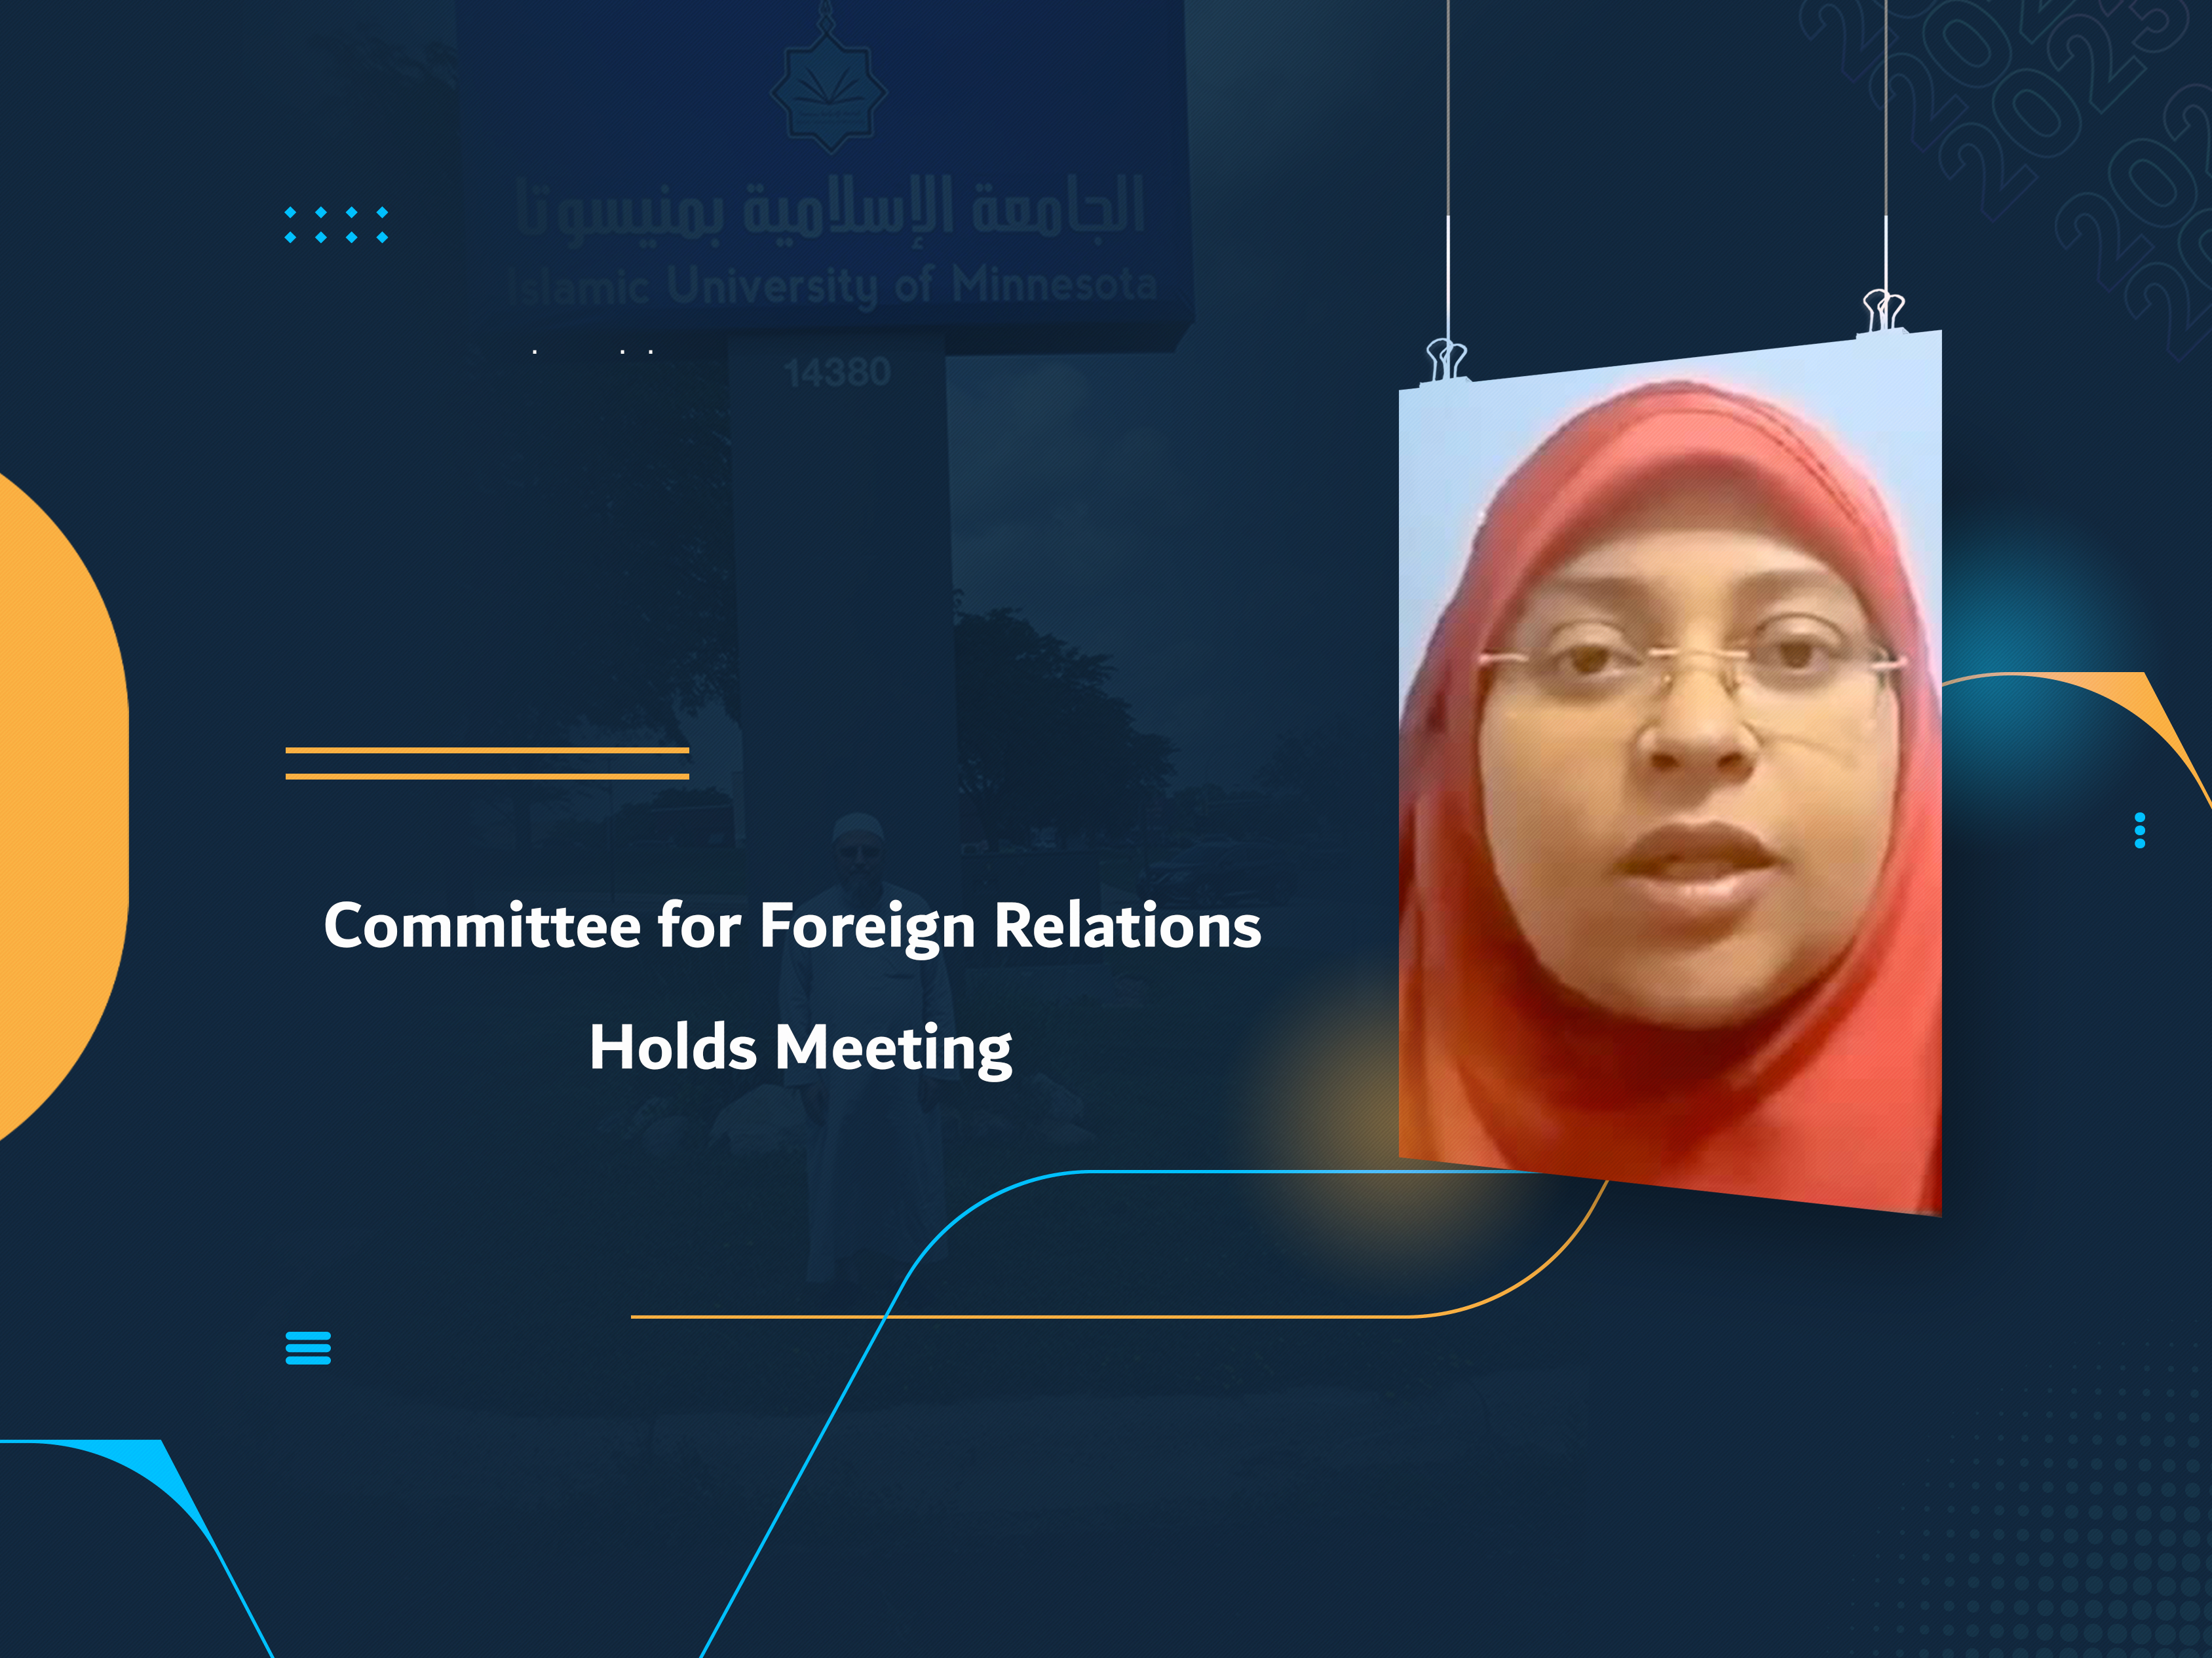 Committee for Foreign Relations Holds Meeting